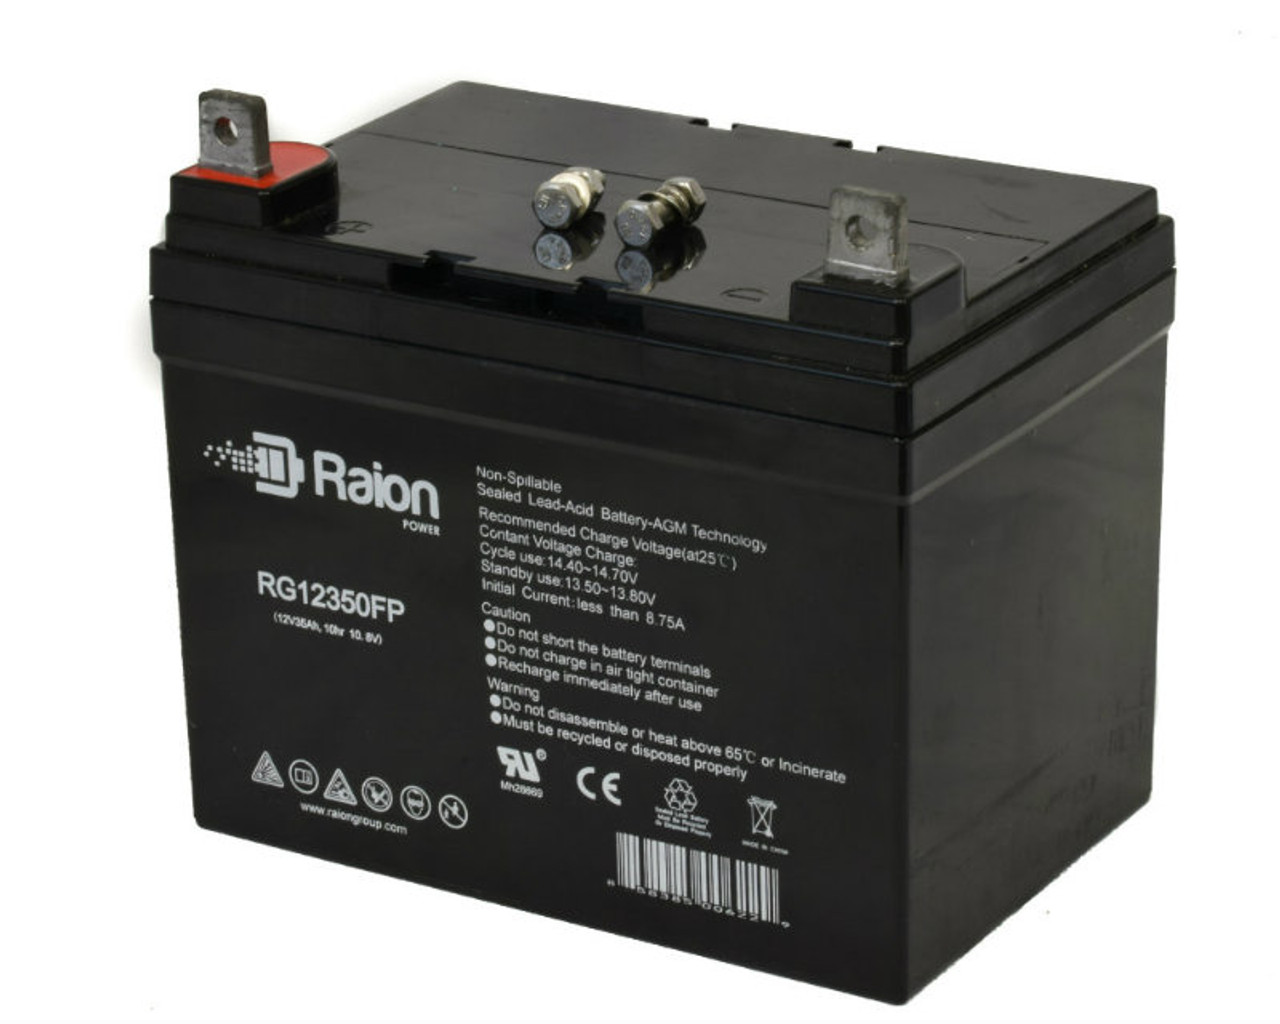 Raion Power Replacement 12V 35Ah Battery for Hisel Power SP12-33 - 1 Pack